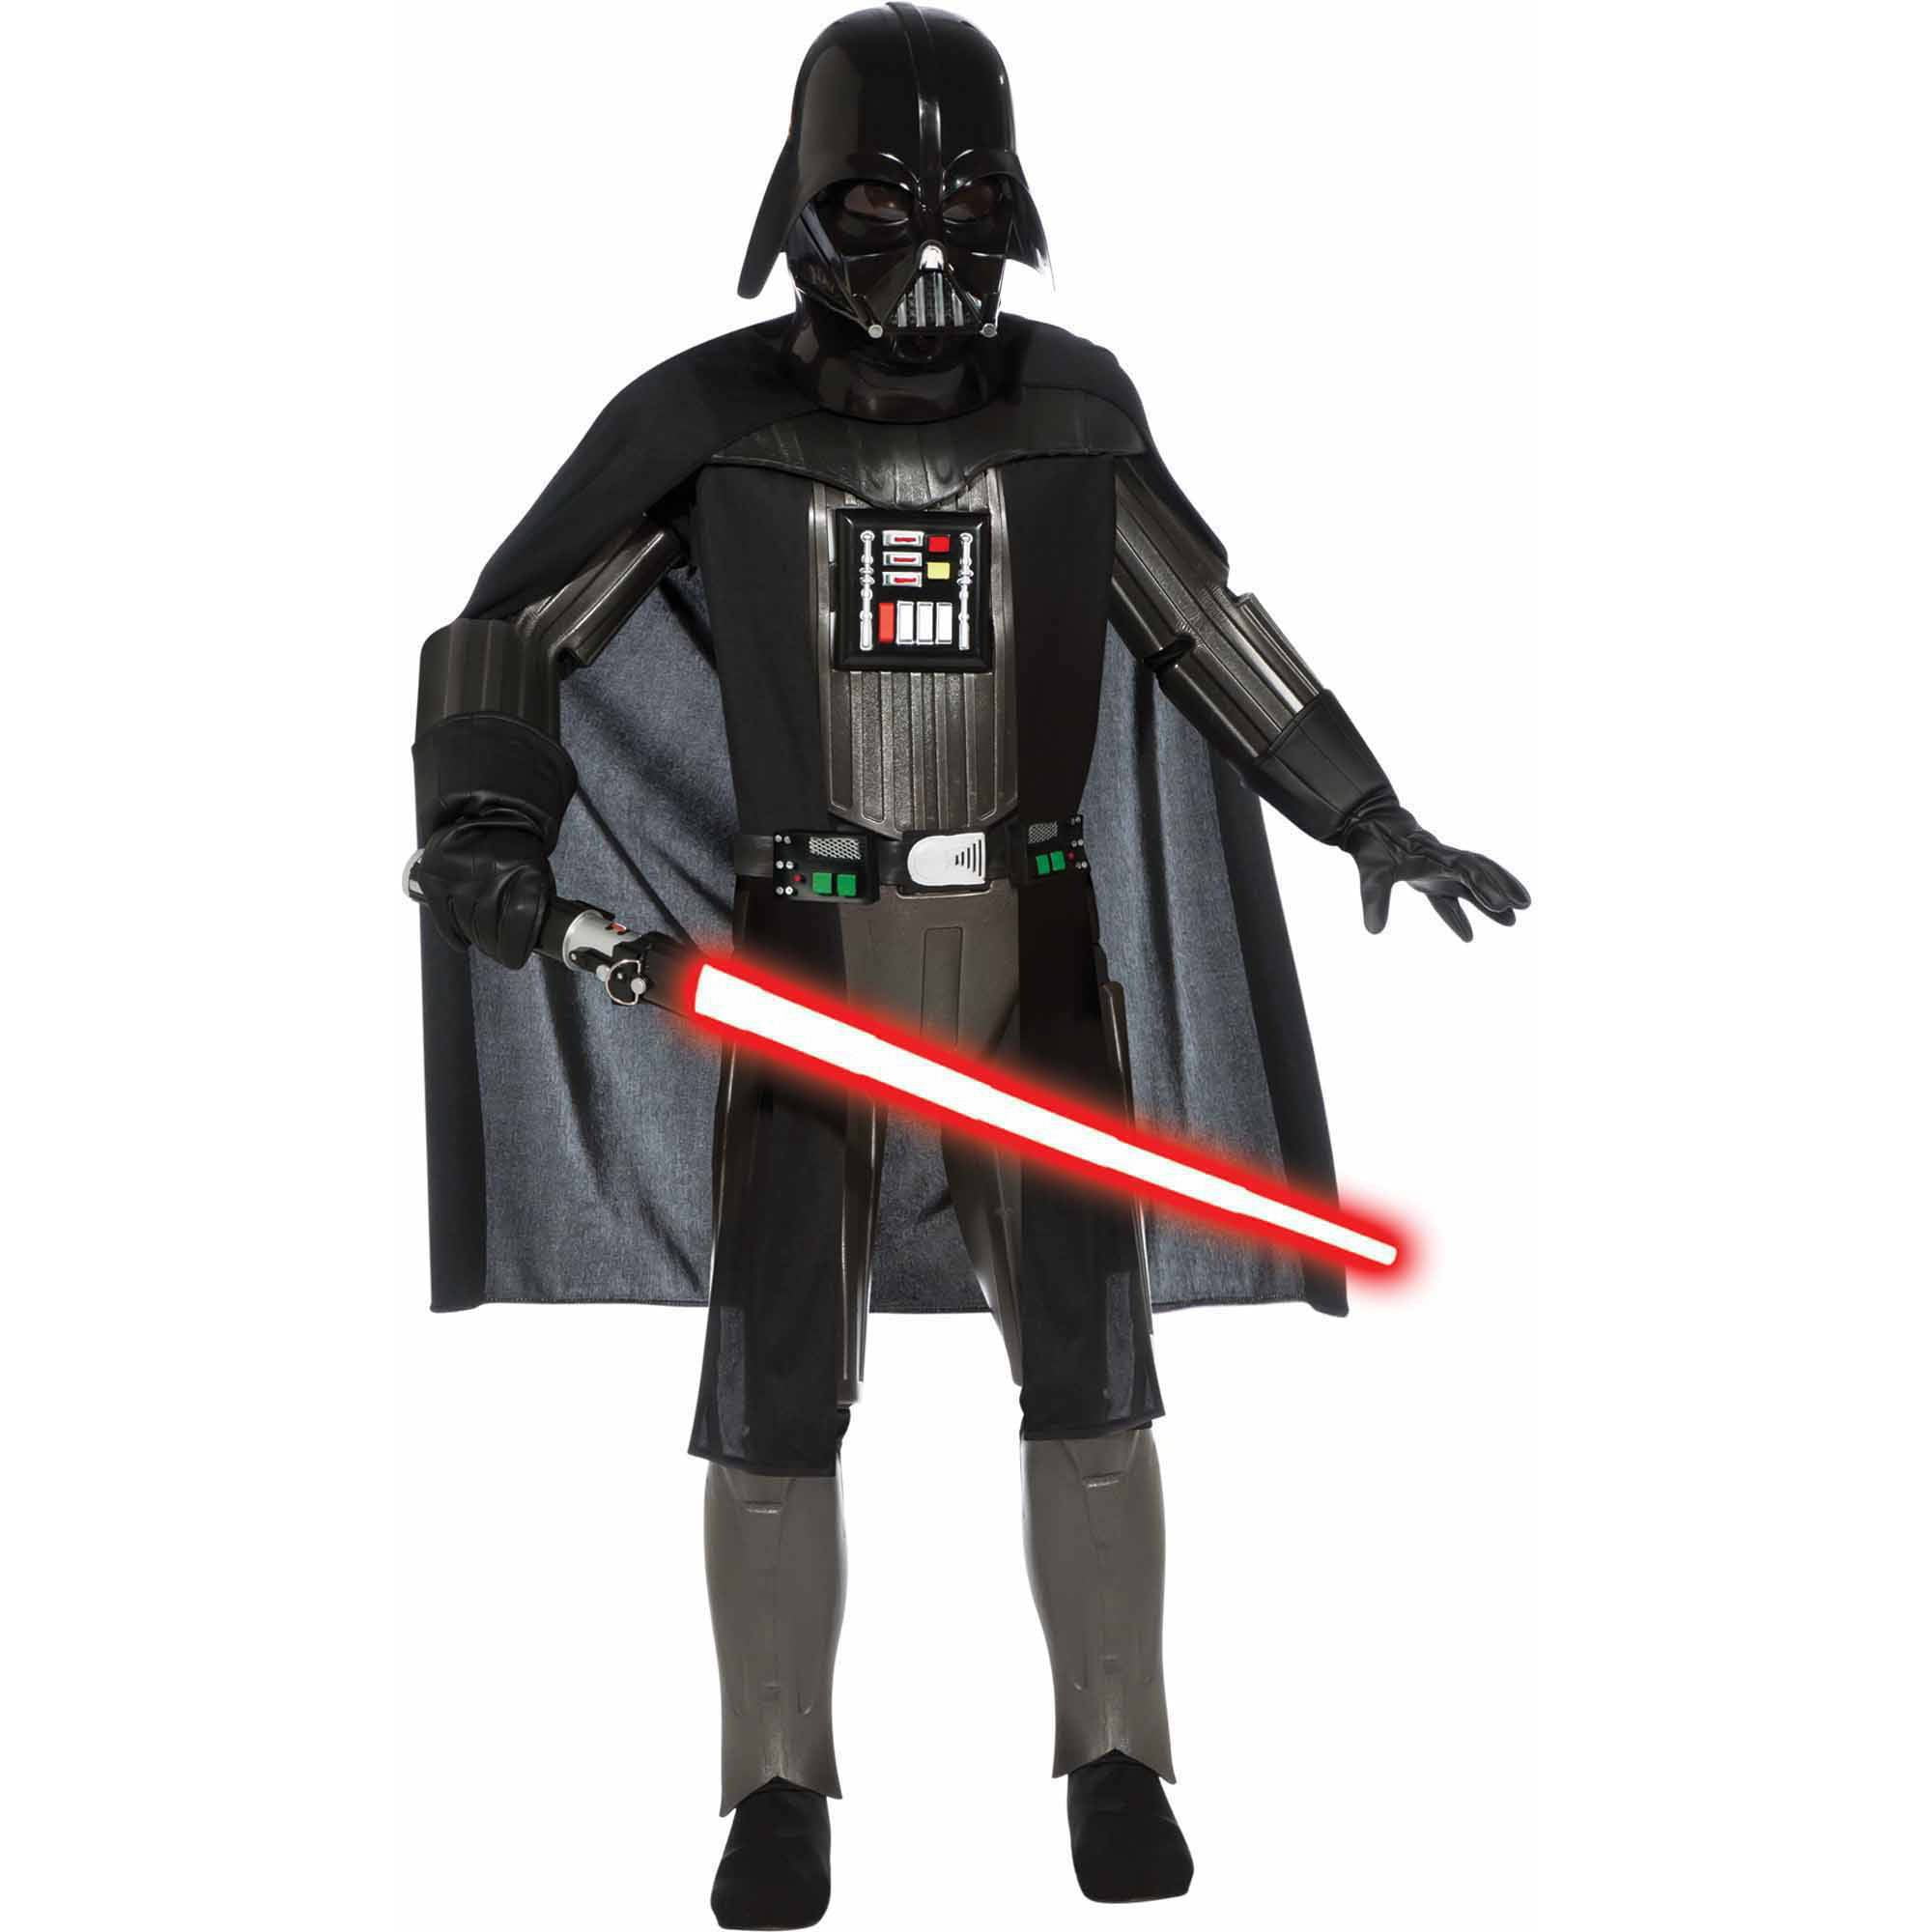 Details about   RUBIE'S STAR WARS DARTH VADER HALLOWEEN COSTUME CAPE MASK SUIT SIZE KIDS M *